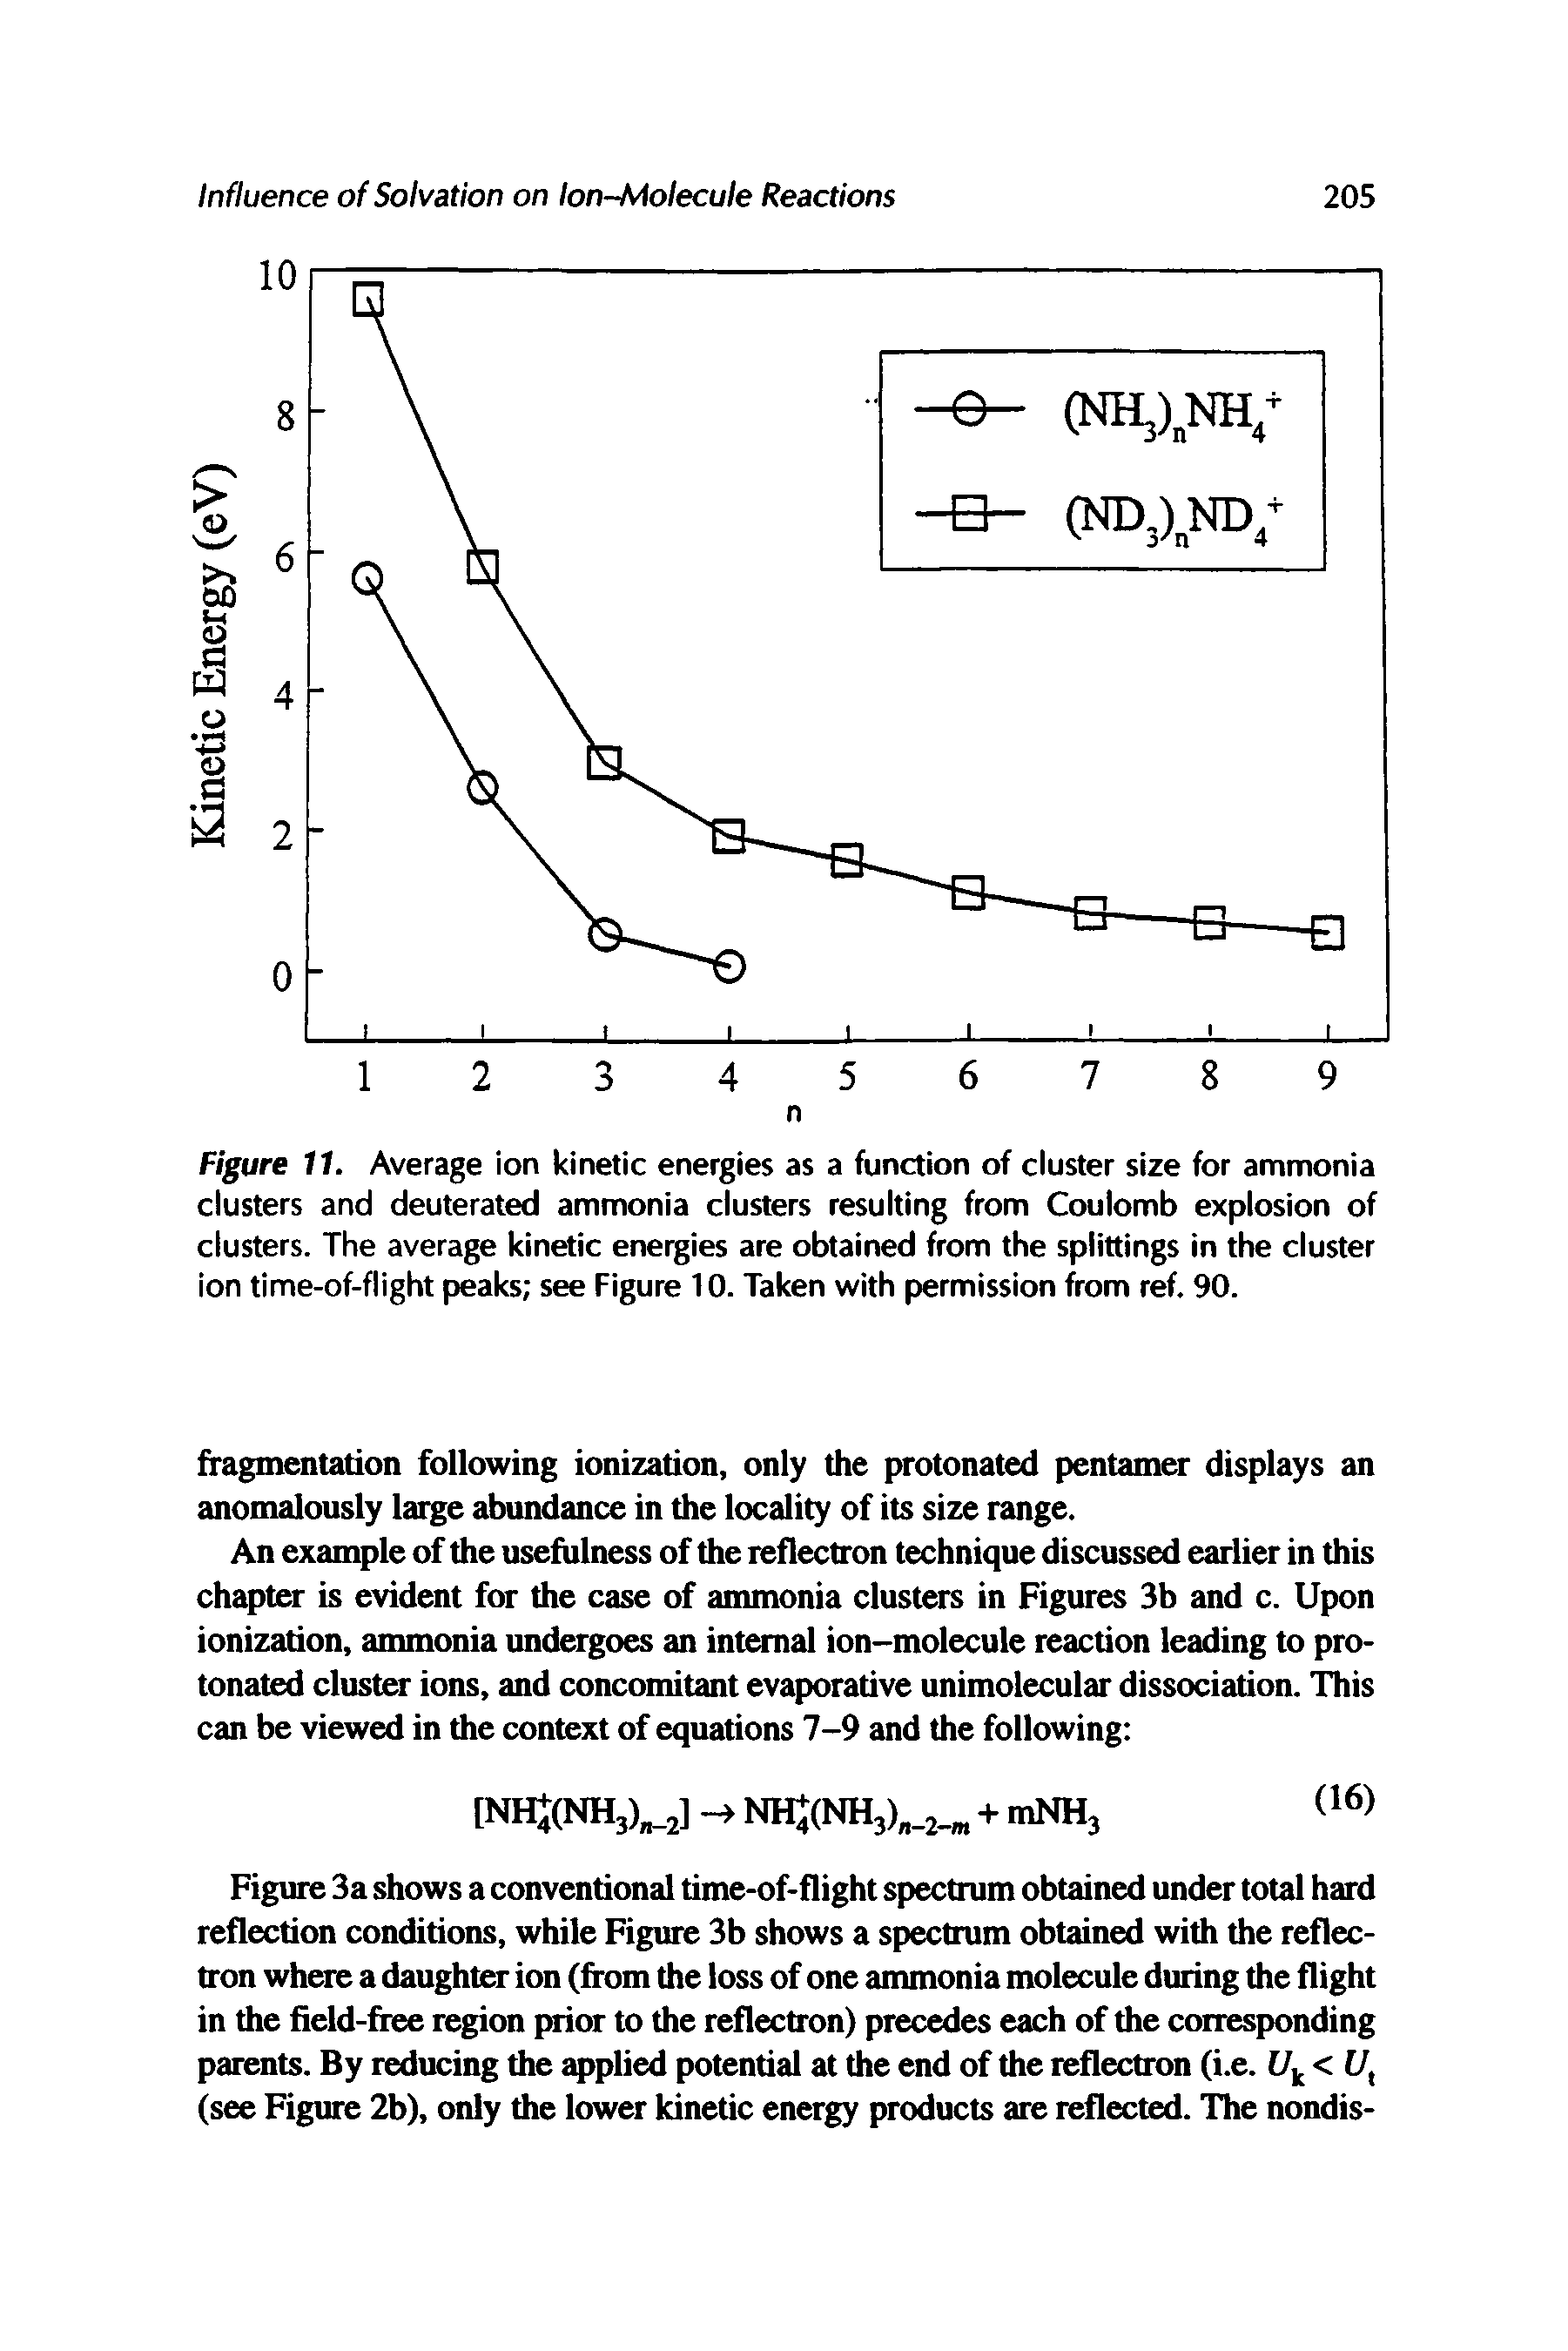 Figure 11. Average ion kinetic energies as a function of cluster size for ammonia clusters and deuterated ammonia clusters resulting from Coulomb explosion of clusters. The average kinetic energies are obtained from the splittings in the cluster ion time-of-flight peaks see Figure 10. Taken with permission from ref. 90.